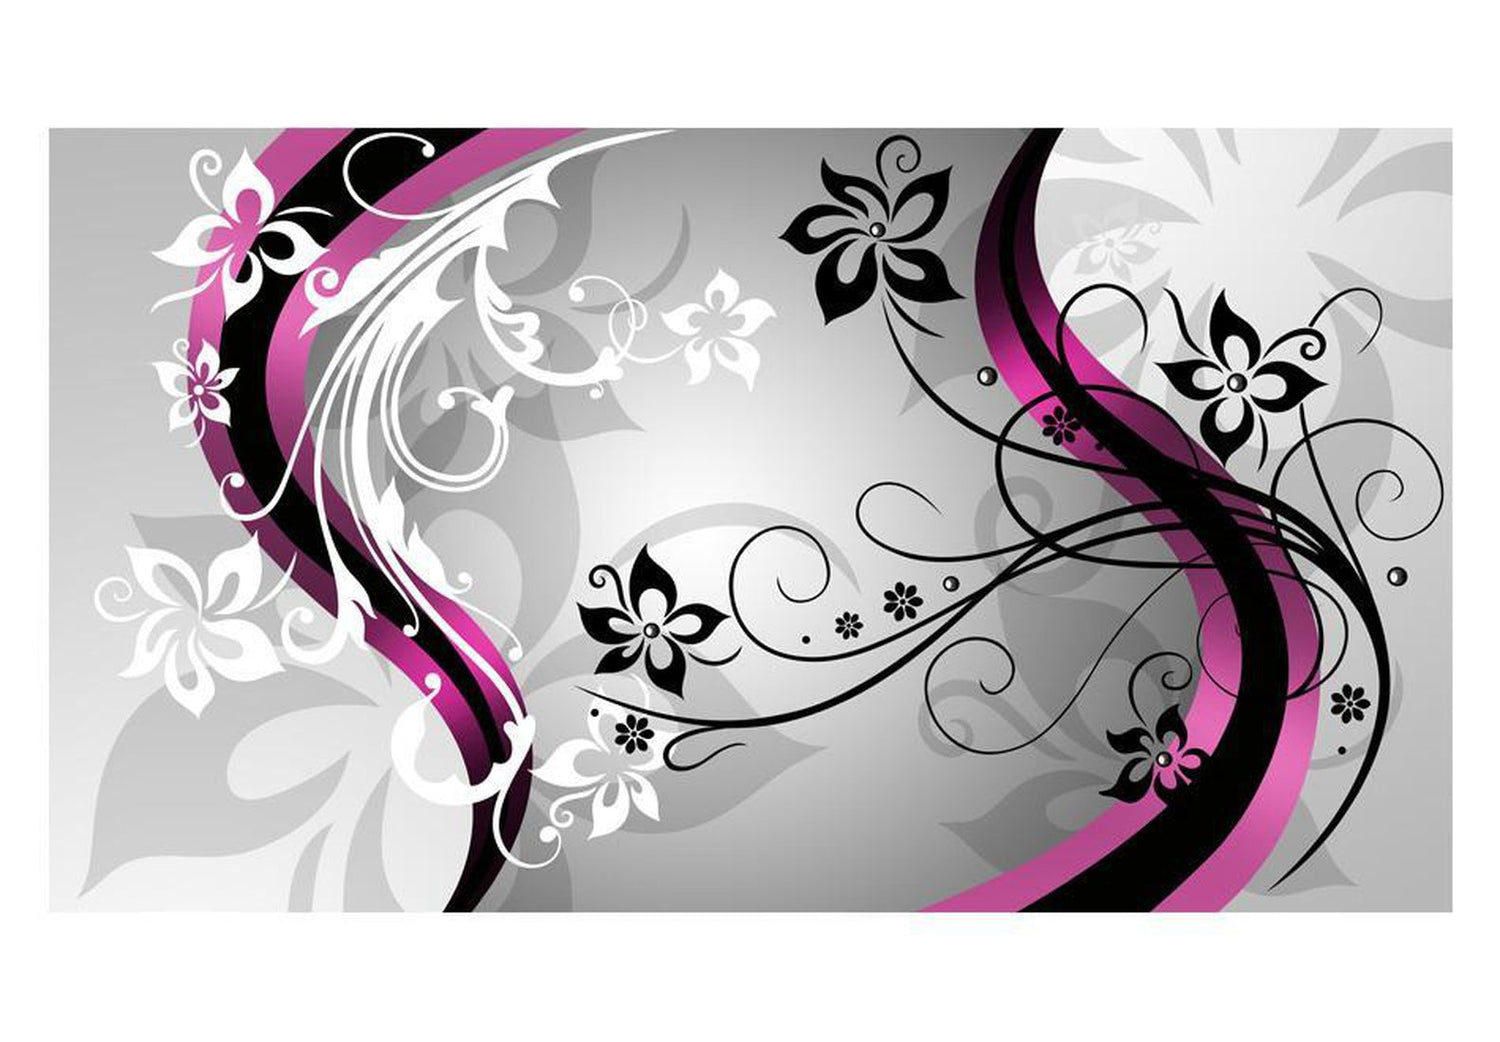 Peel & Stick Glam Wall Mural - Art-Flowers Pink - Removable Wall Decals